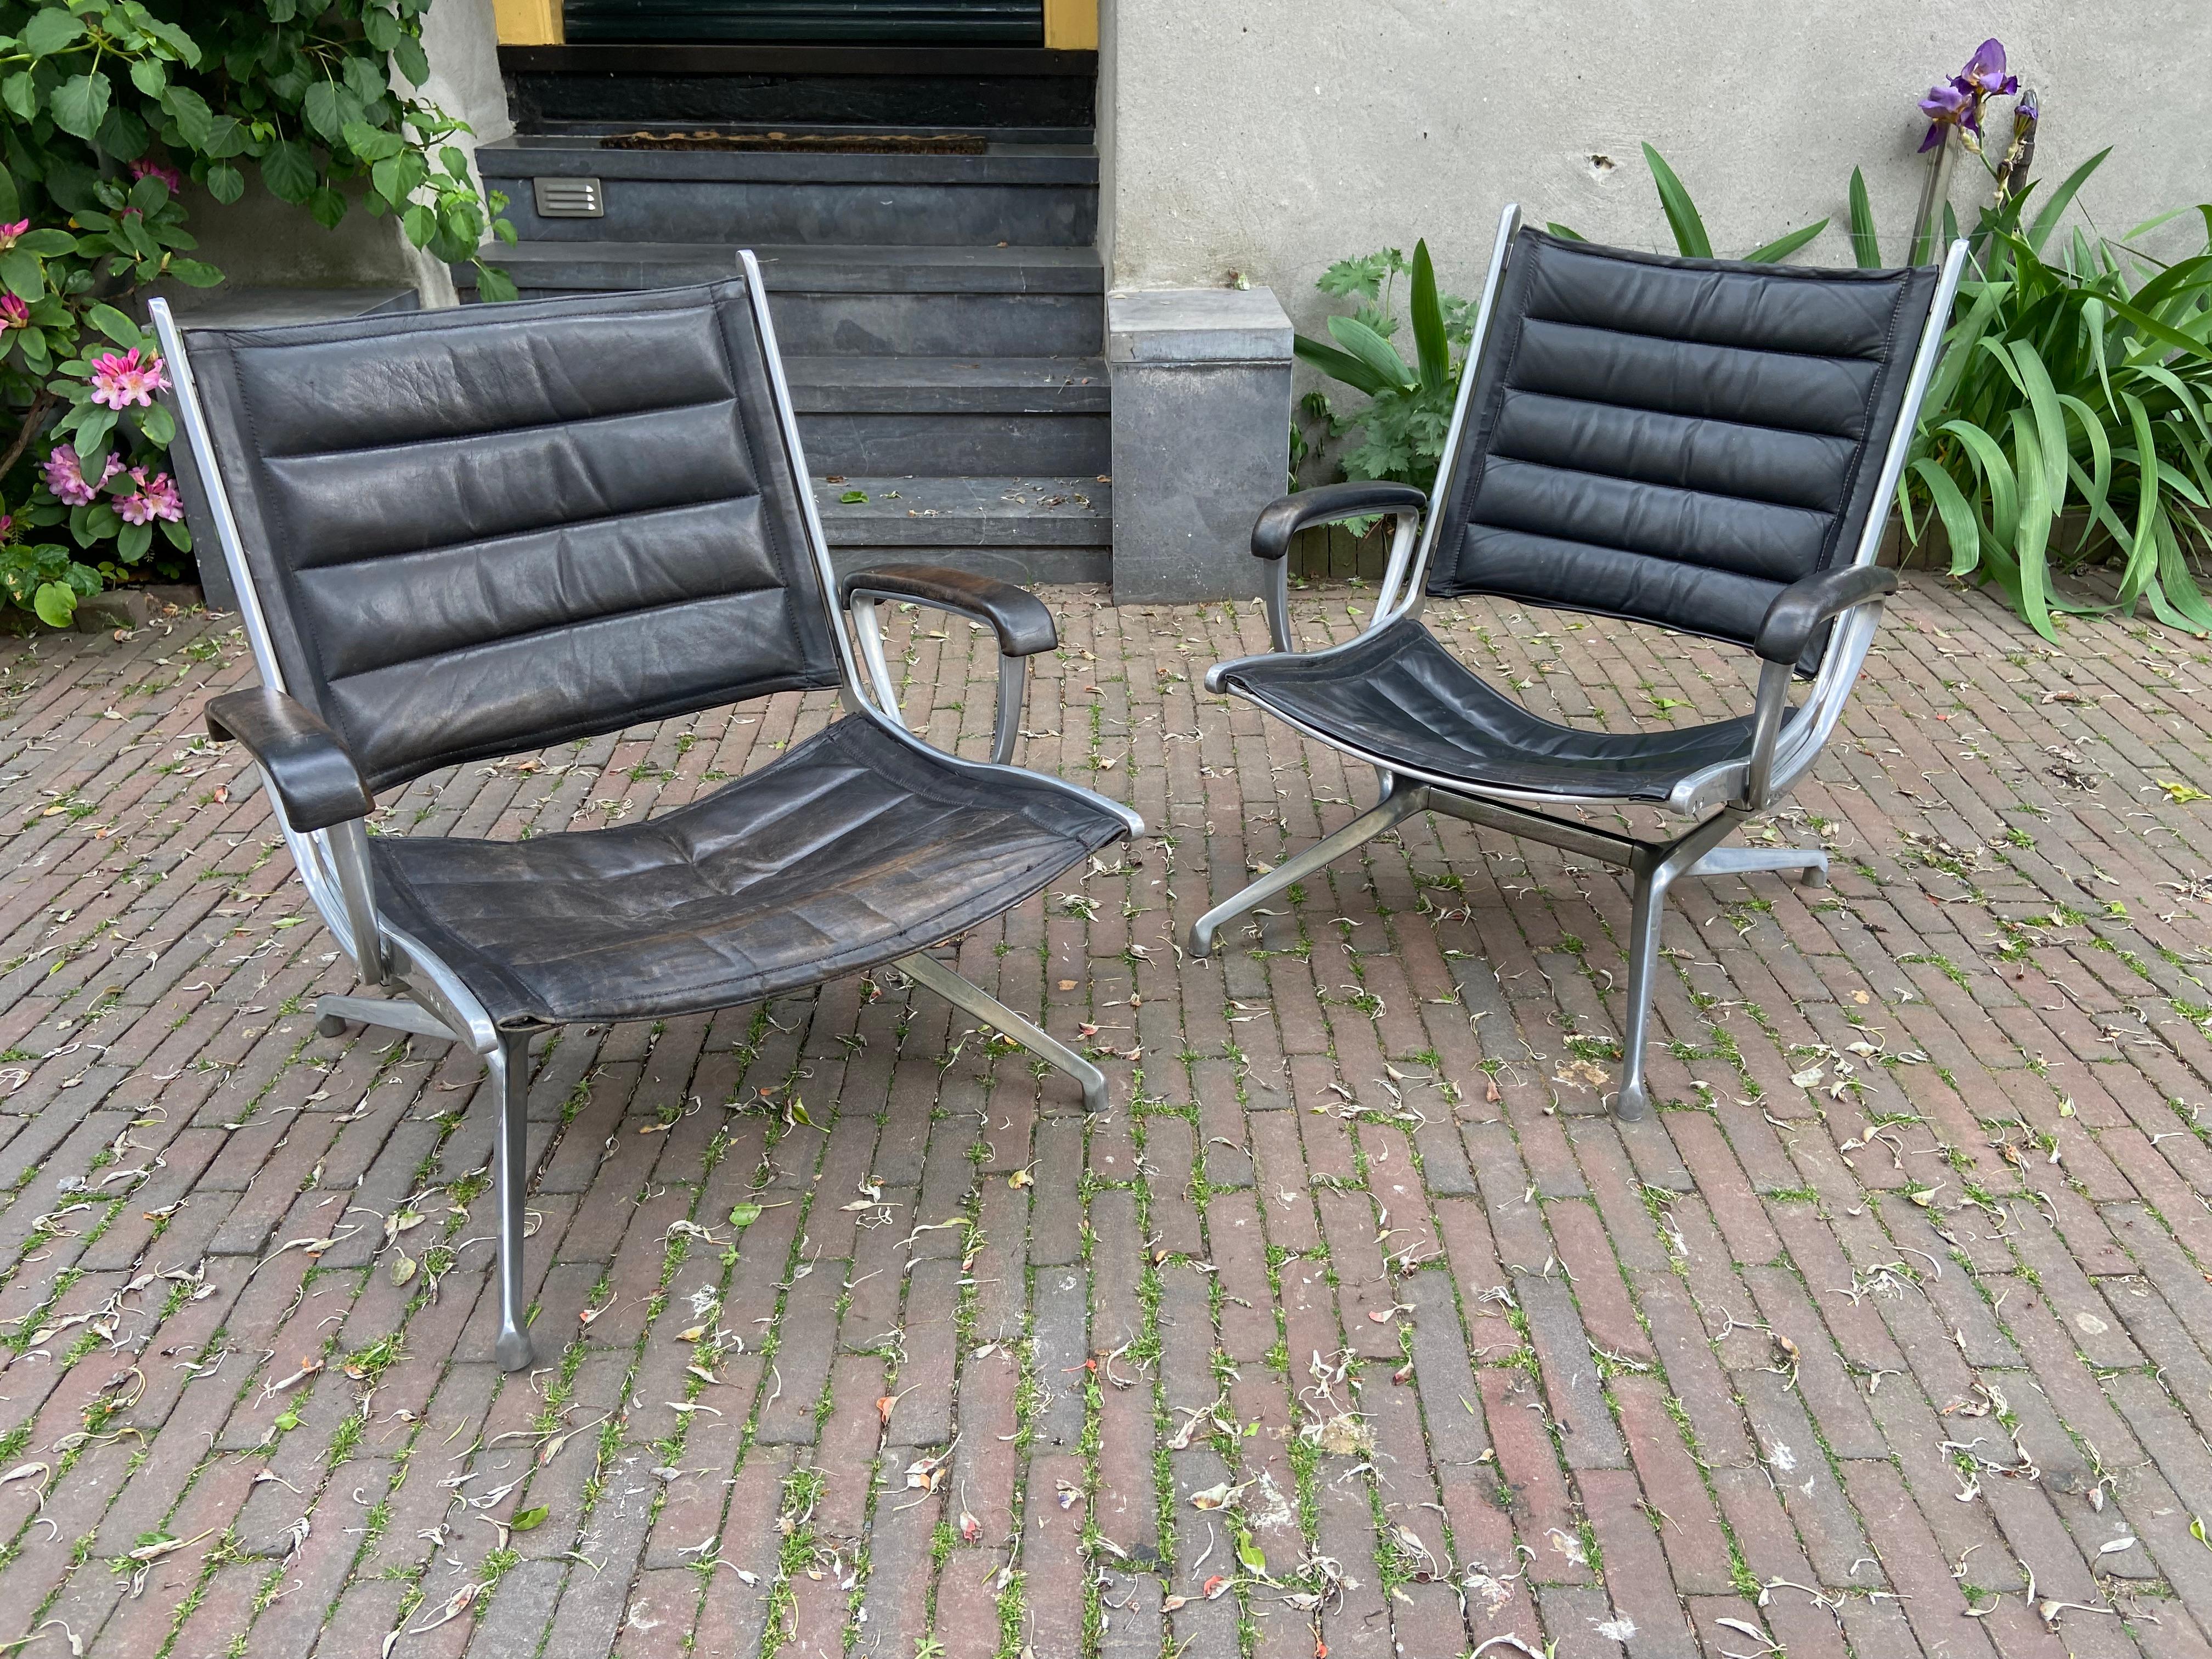 Pair of armchairs by Paul Tuttle for Strässle International, Switzerland, 1960ties.
Metal frames with black leather, in a good vintage condition.
Two sizes: one for the lady and one for the gentleman.